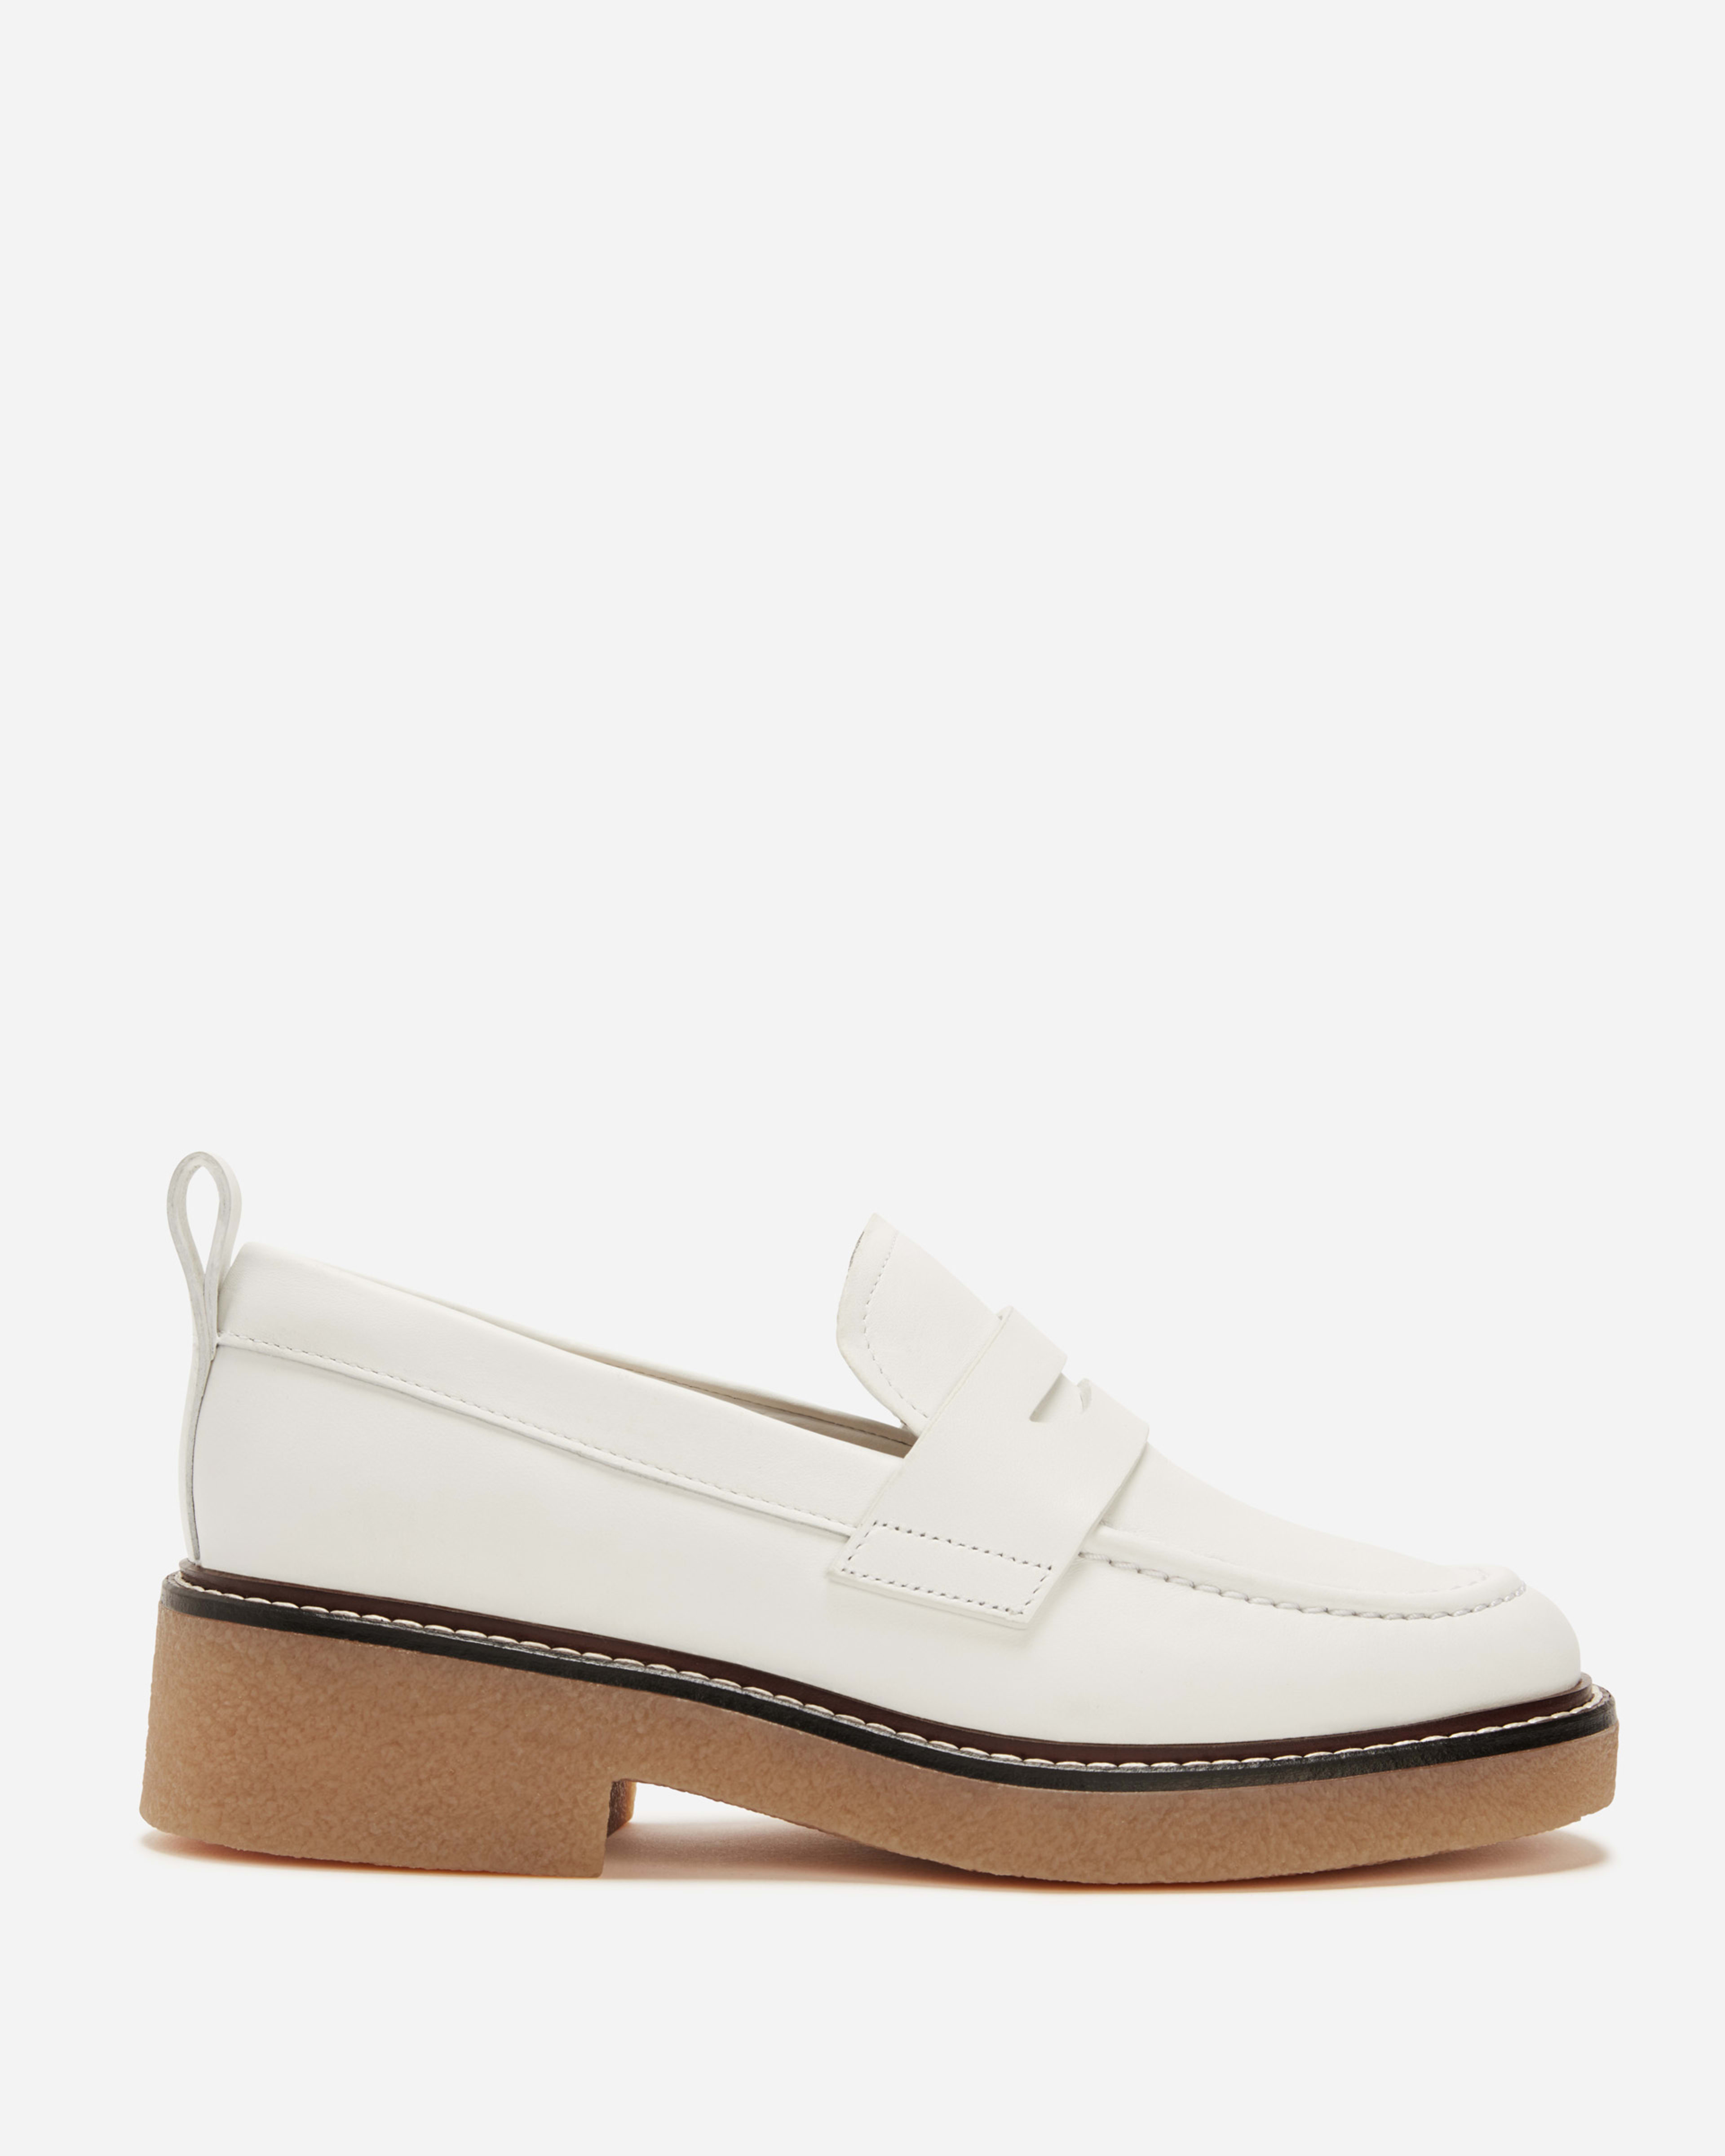 The Gum Sole Penny Loafer White – Everlane